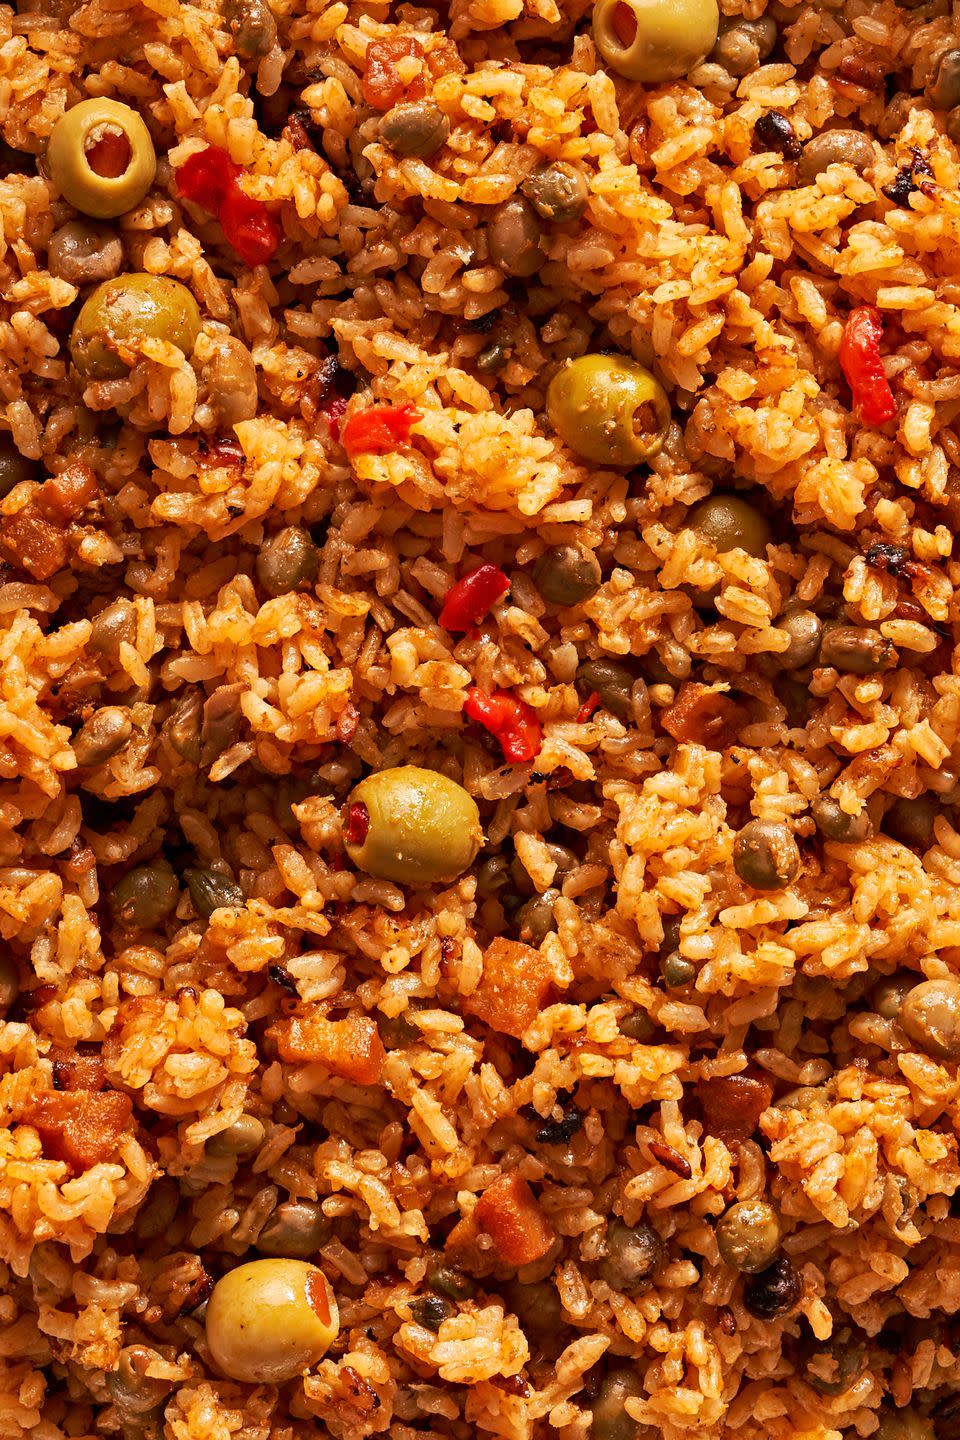 arroz con gandules or sofrito rice with pigeon peas